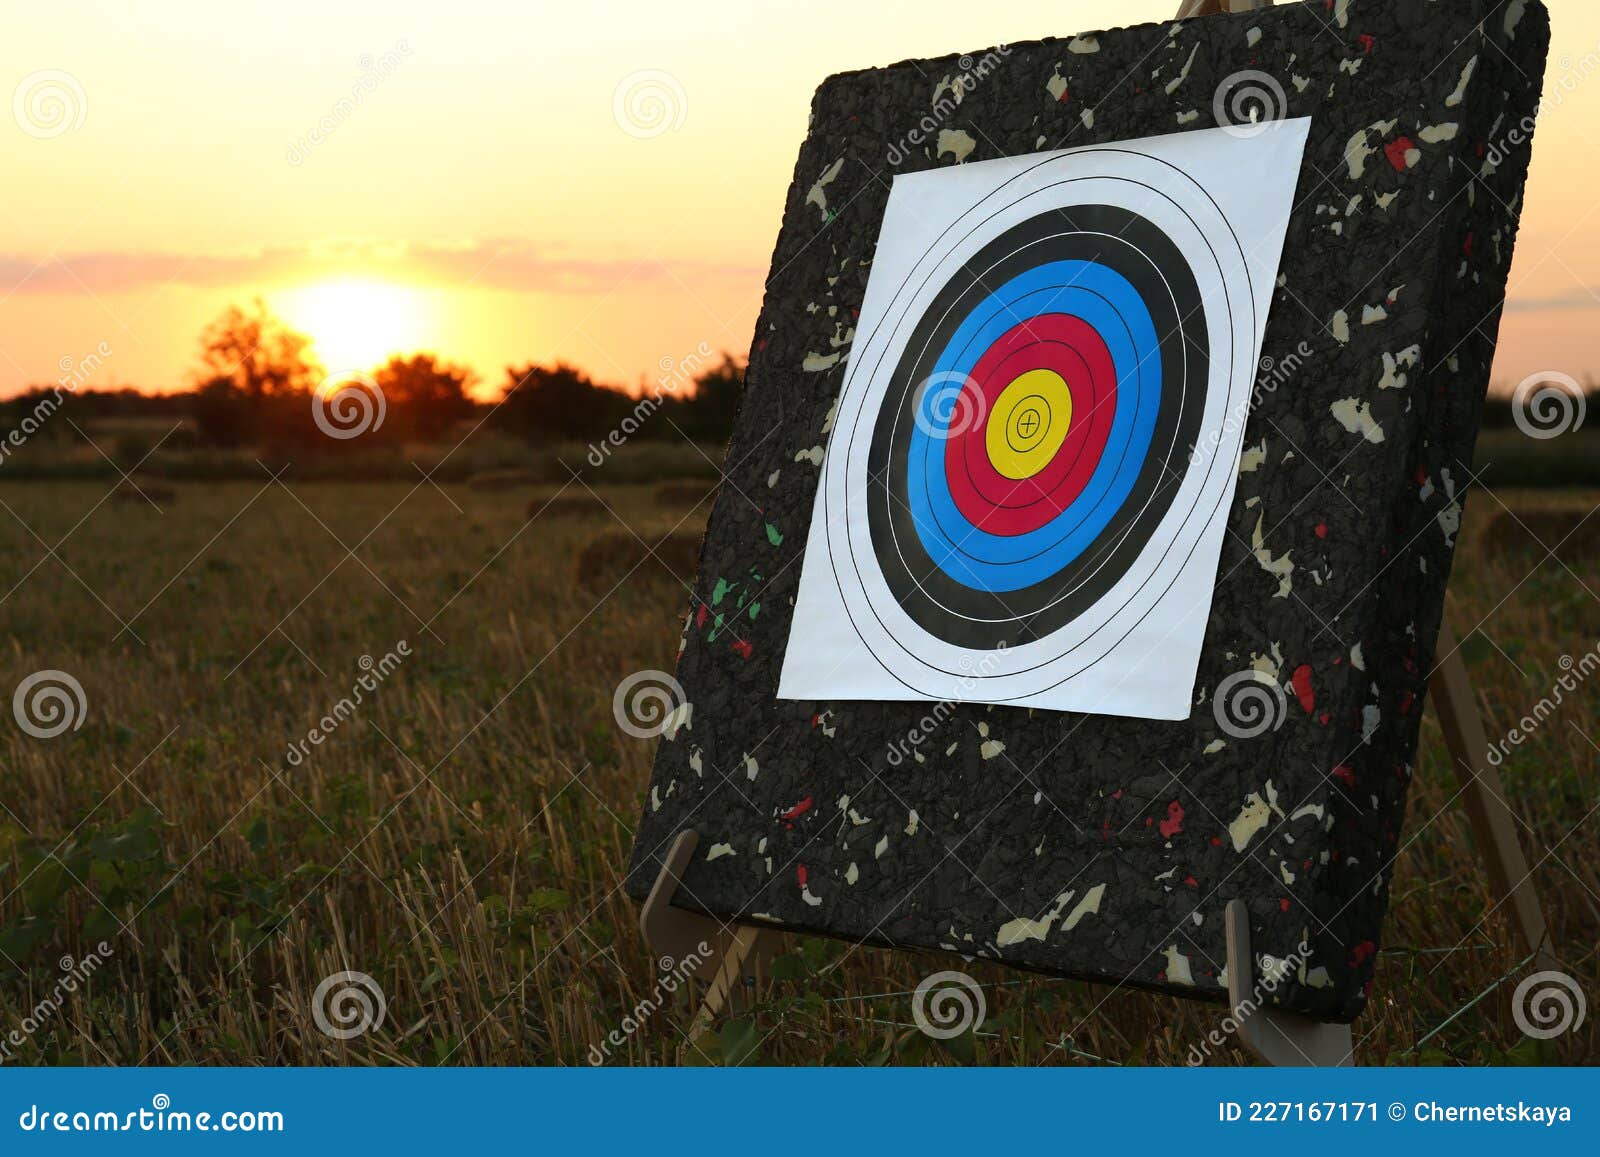 tripod with archery target in field at sunset